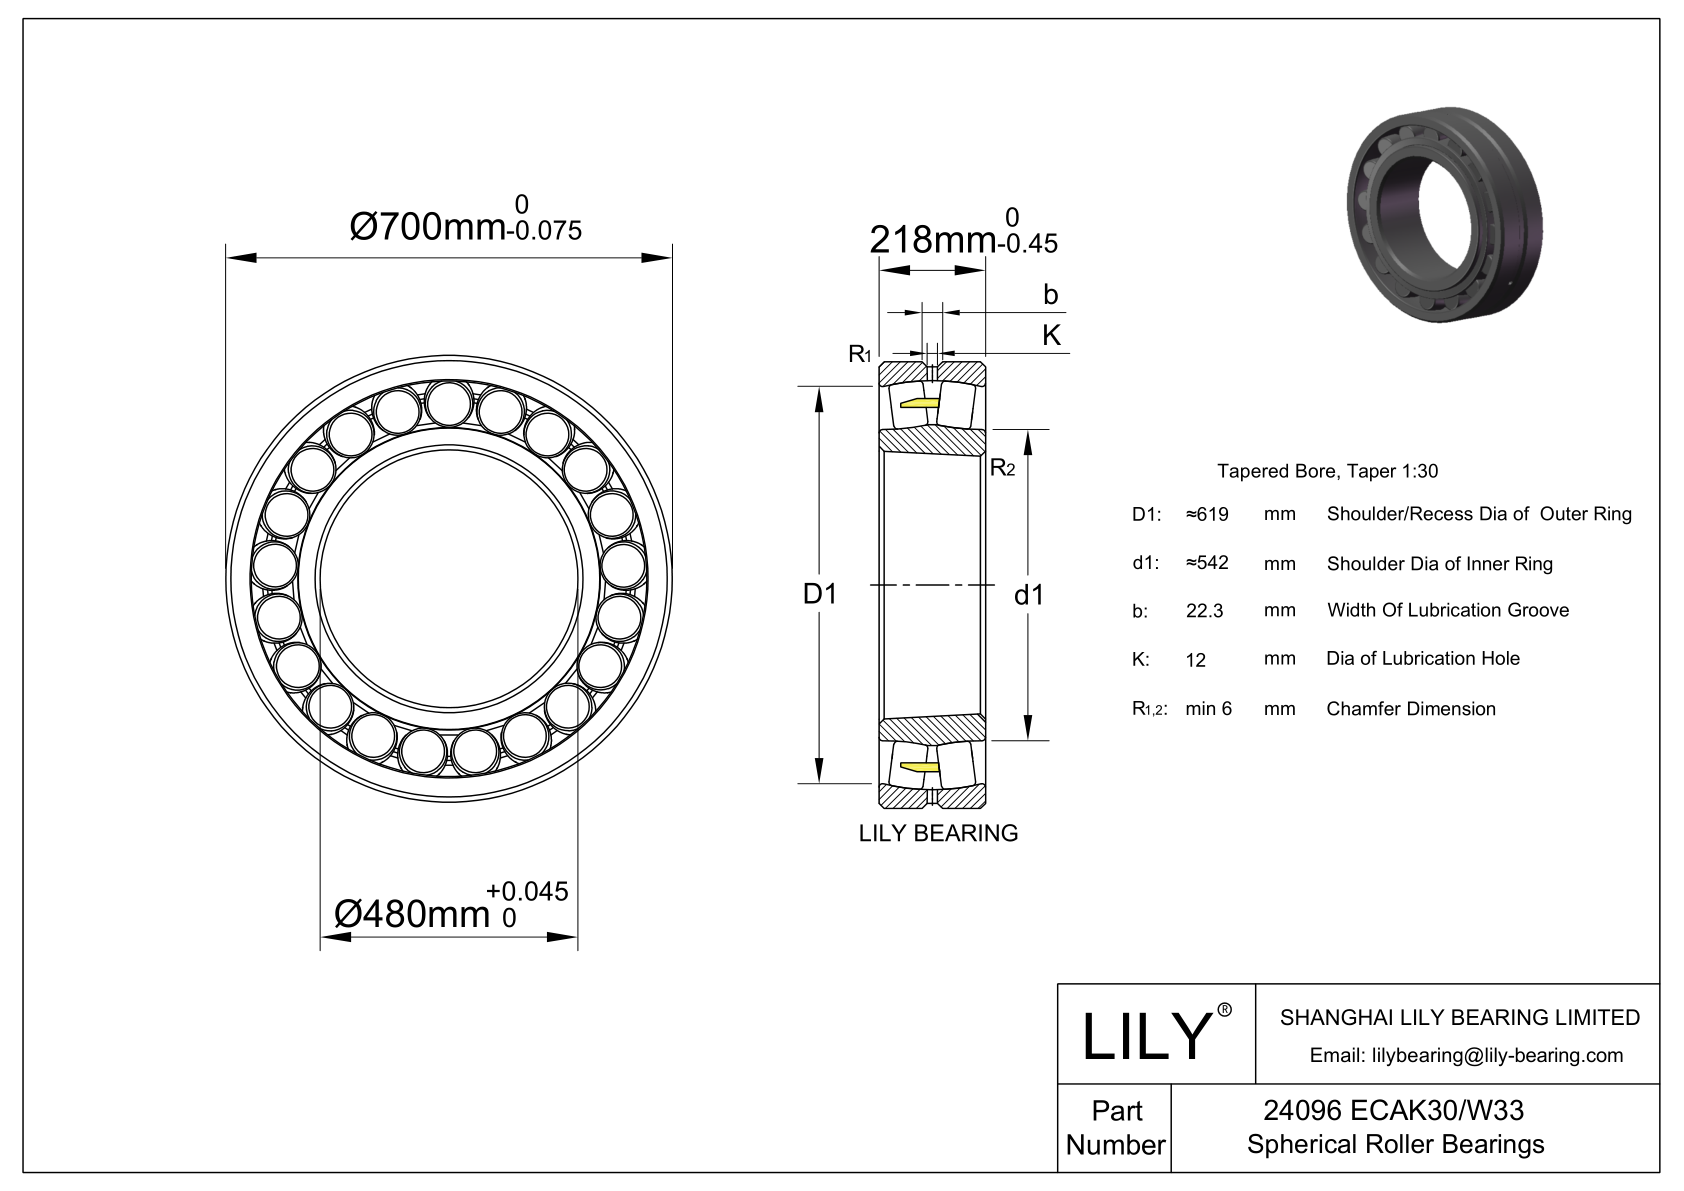 24096 ECAK30/W33 Double Row Spherical Roller Bearing cad drawing